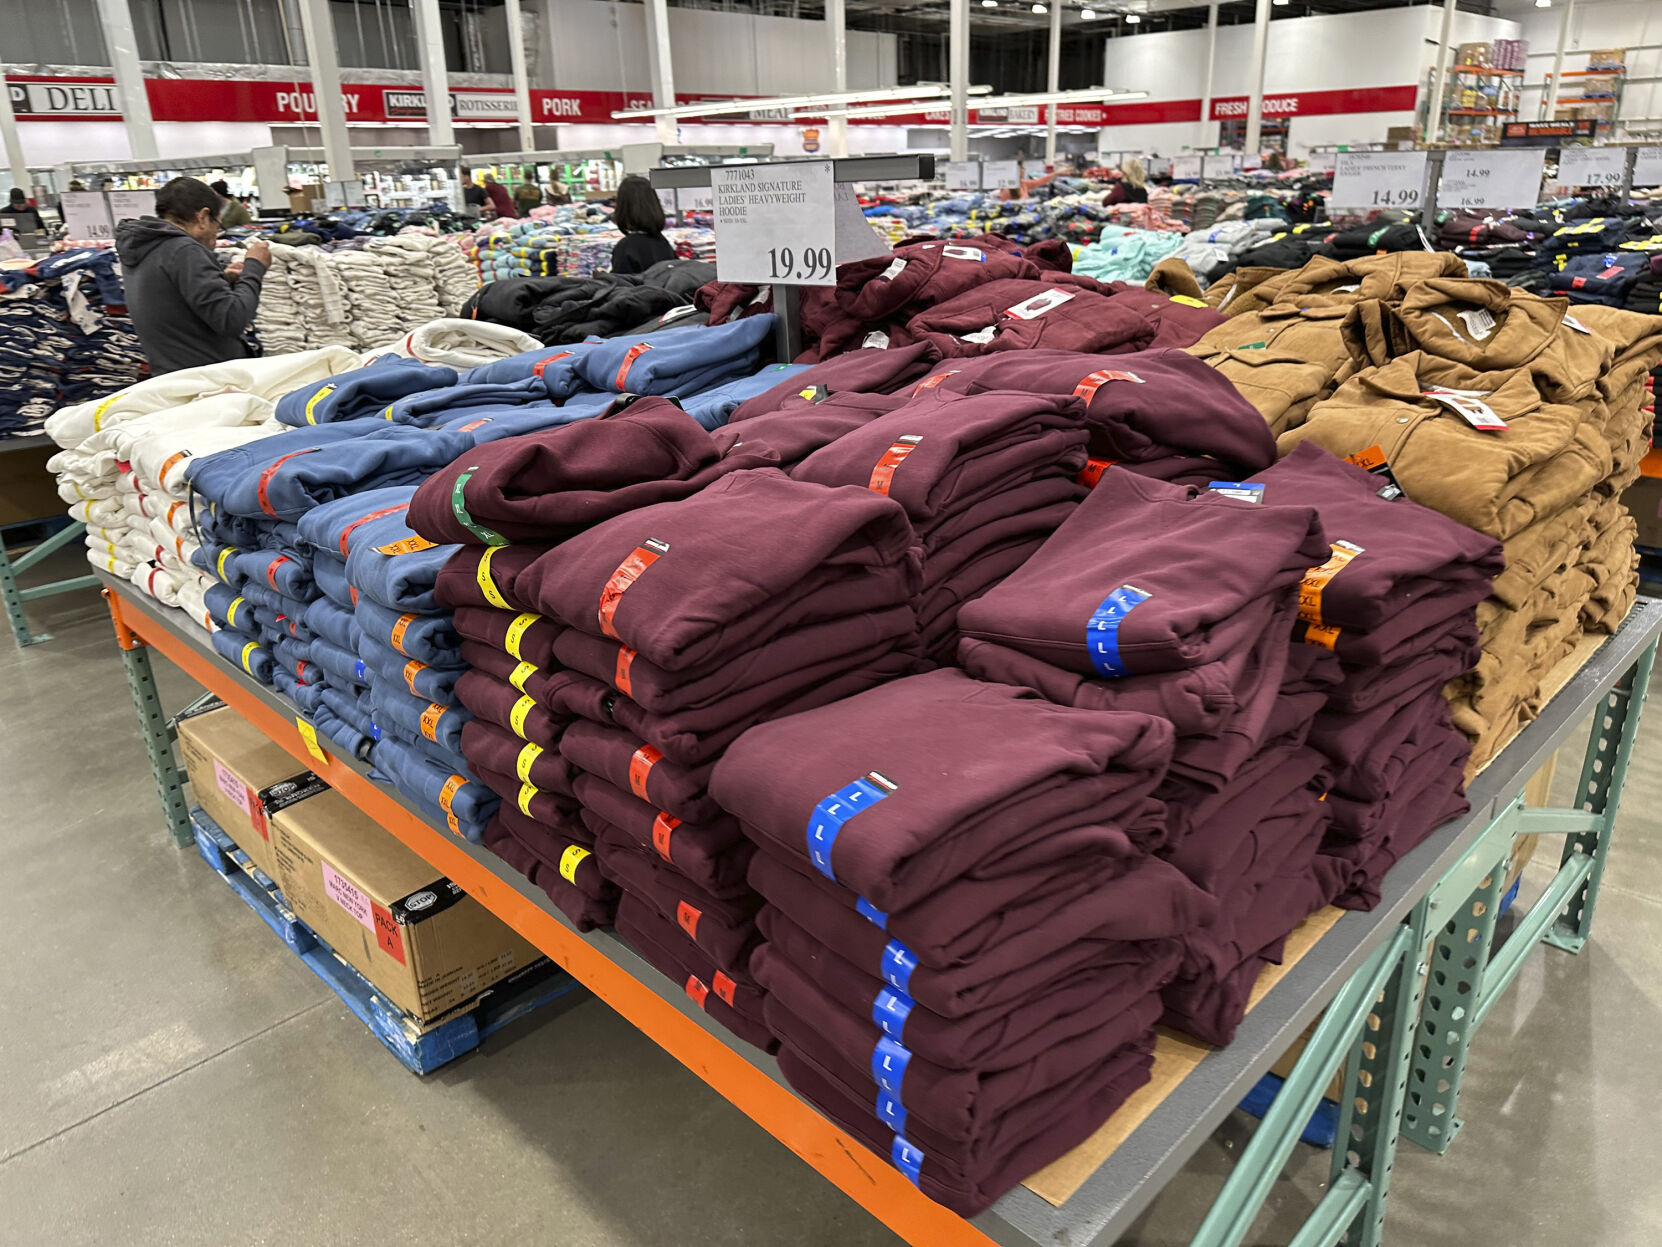 <p>Shoppers peruse stacks of hoodies on display in a Costco warehouse Tuesday, Jan. 30, 2024, in Timnath, Colo. The Commerce Department releases U.S. retail sales data for January on Thursday, Feb. 15, 2024. (AP Photo/David Zalubowski)</p>   PHOTO CREDIT: David Zalubowski 